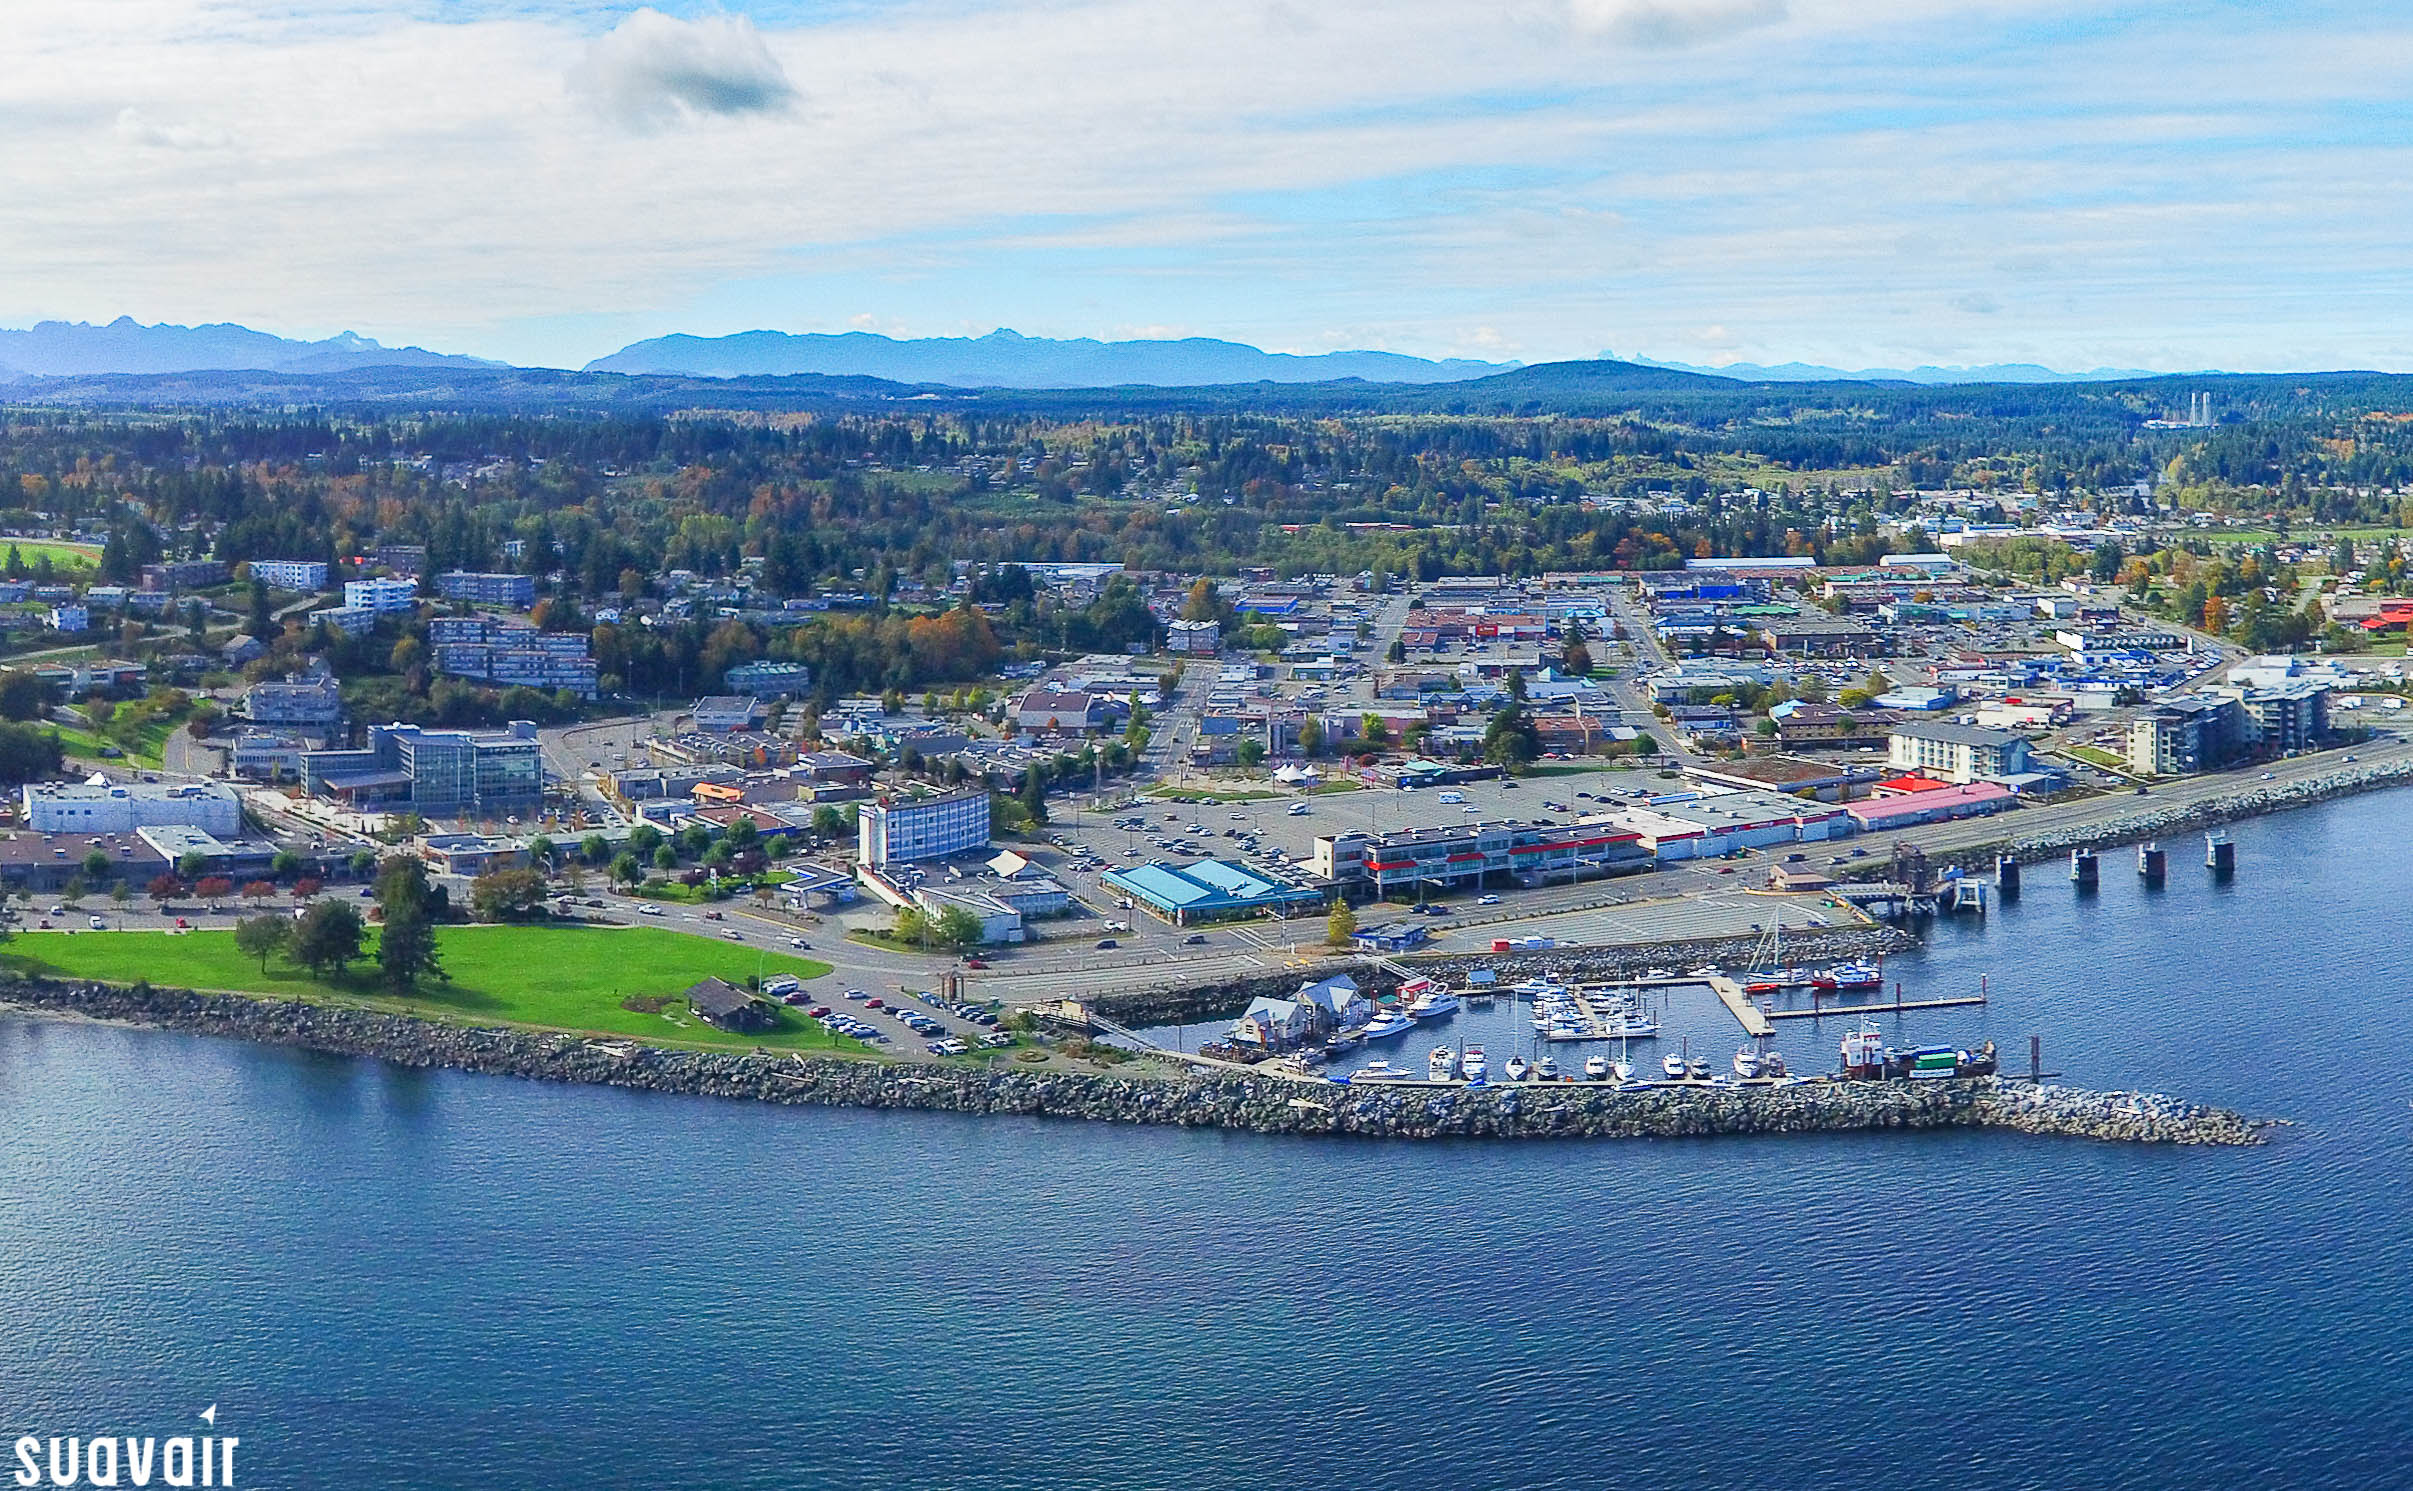 Downtown Campbell River